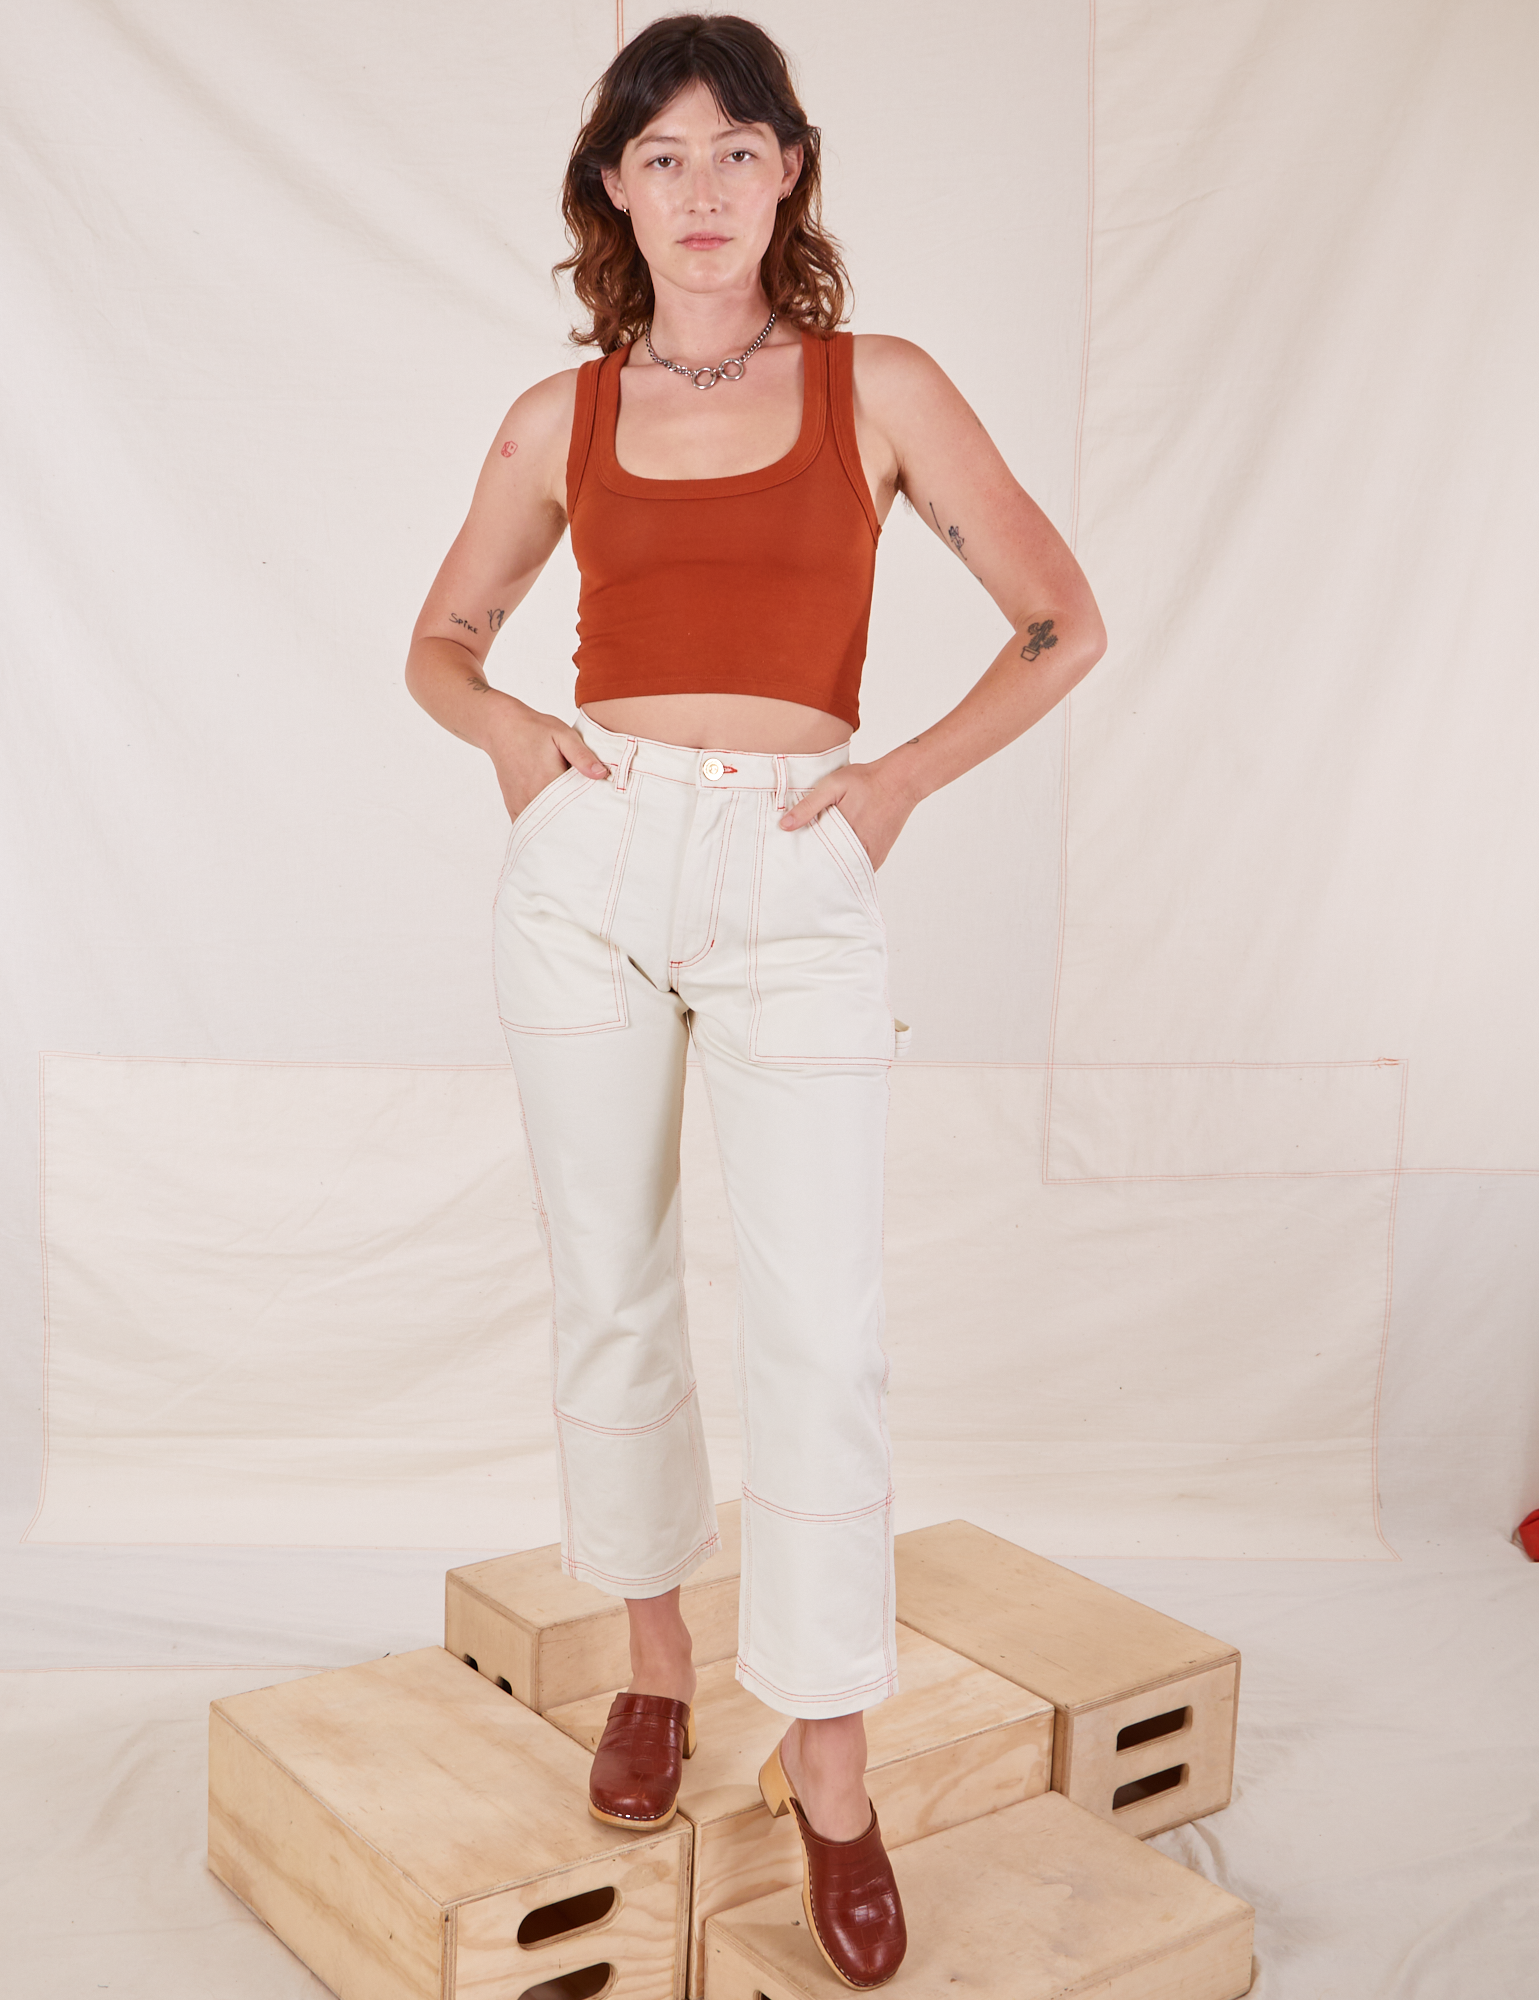 Alex is wearing Carpenter Jeans in Vintage Off-White and burnt terracotta Cropped Tank Top